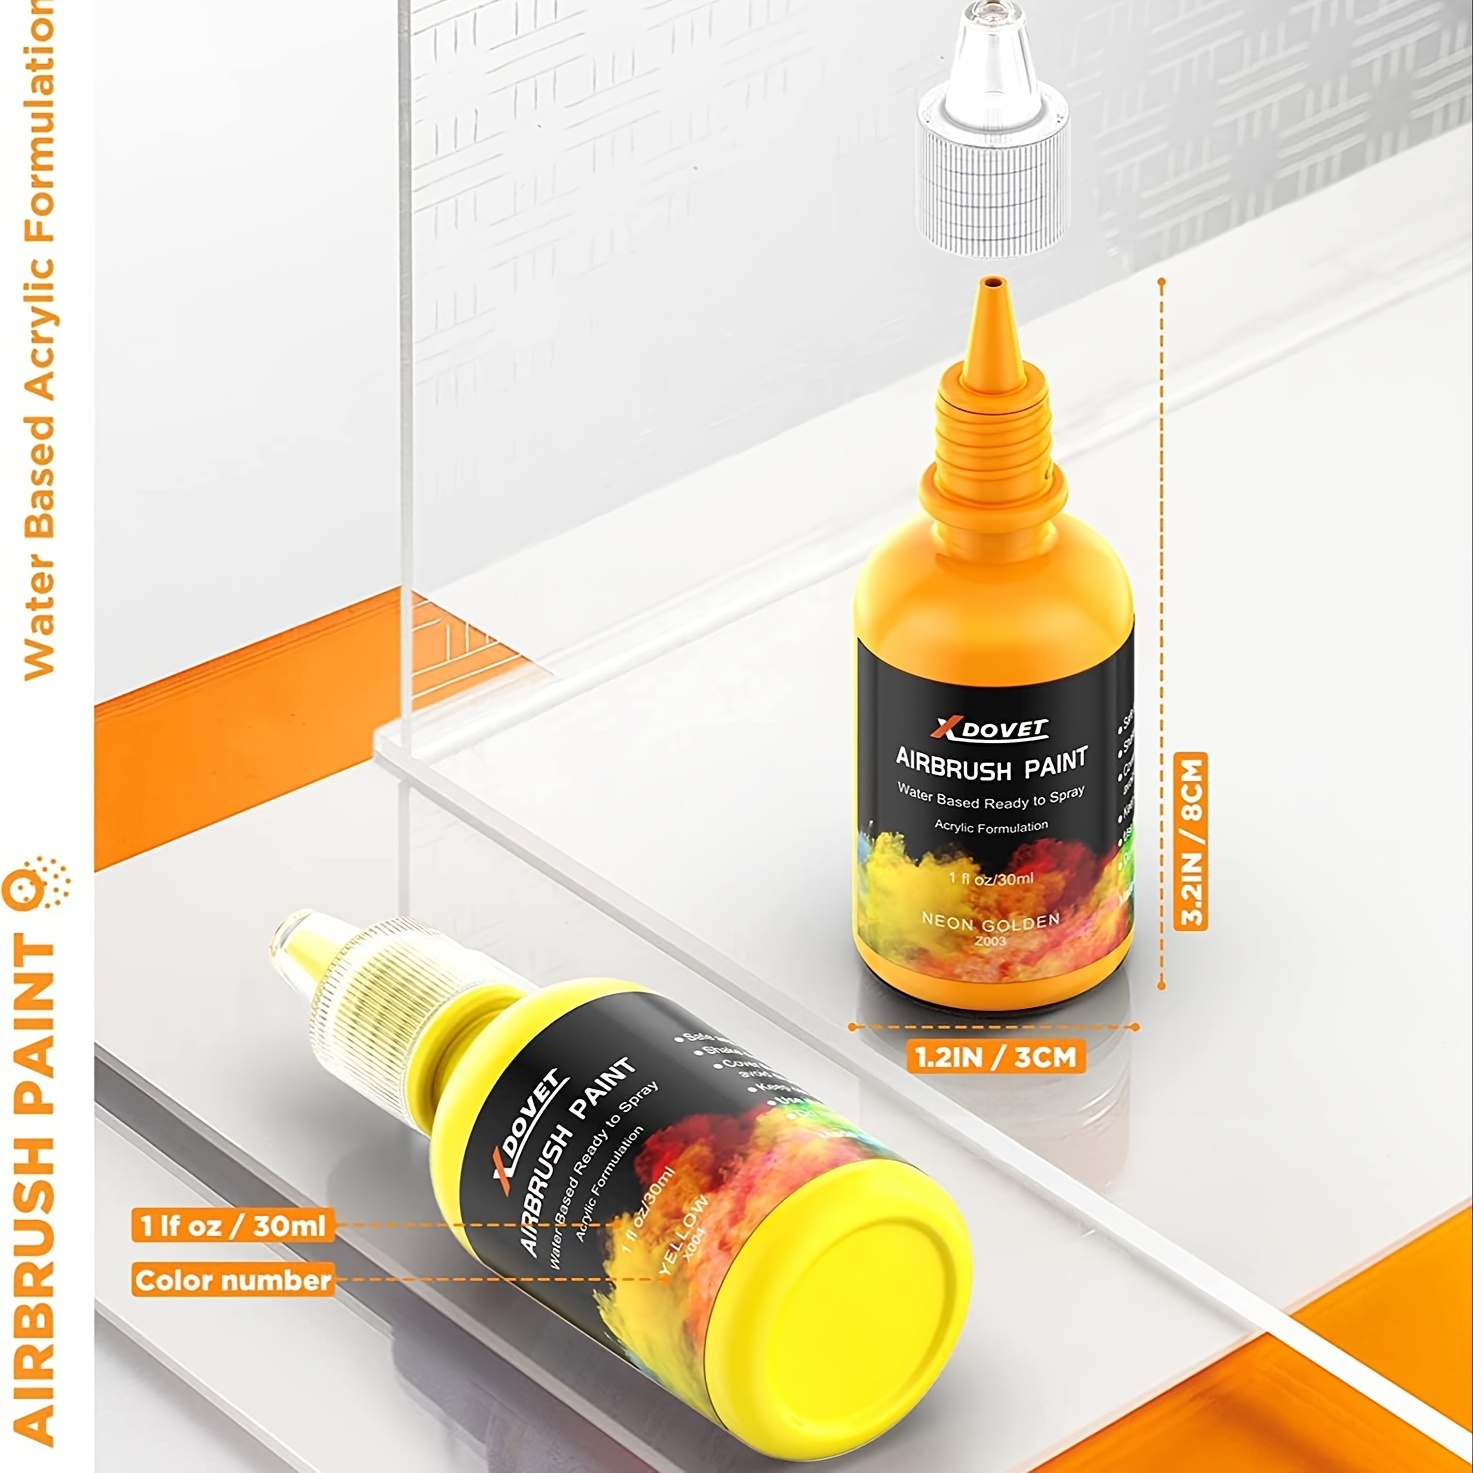 paint water based airbrush , water based airbrush paint , water based paint  spray - Ningbo Tianhong Stationery Co., Ltd.